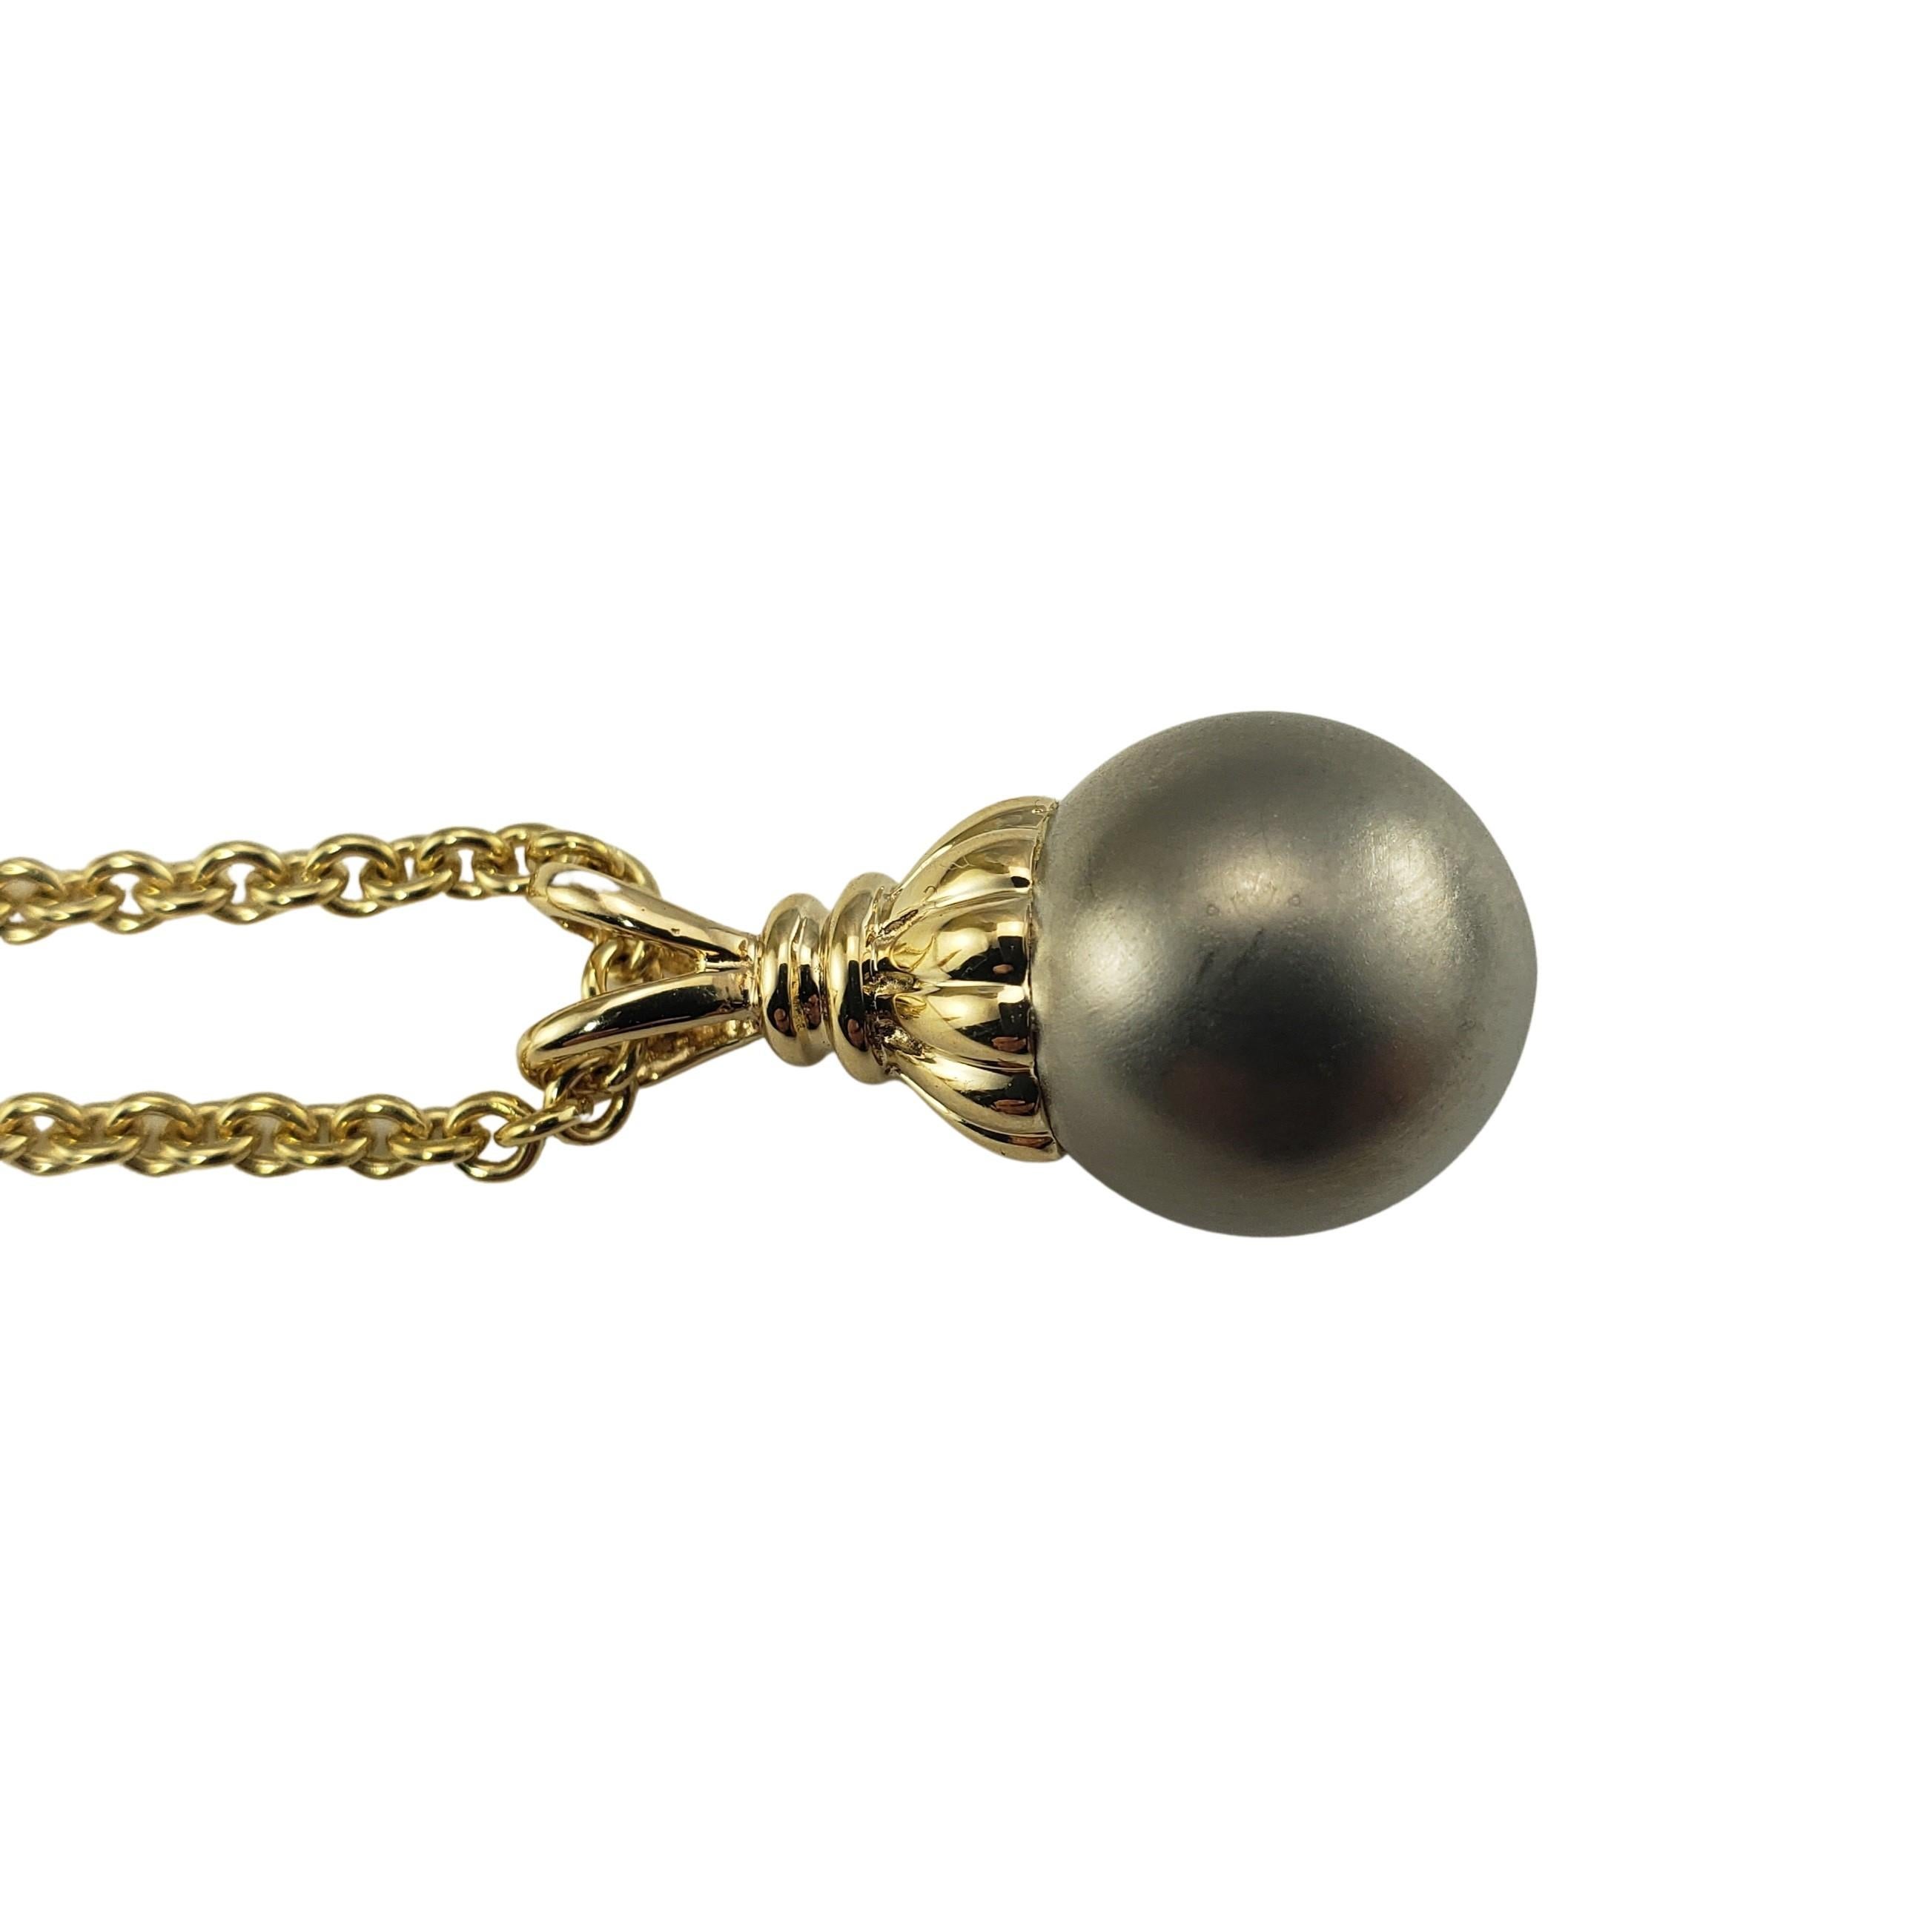 14 Karat Grey Pearl Pendant Necklace-

This stunning pendant features one grey pearl (12 mm) set in beautifully detailed 14K yellow gold.  Suspends from a classic cable necklace.

Size:  24 mm x 12 mm (pendant)
          16 inches